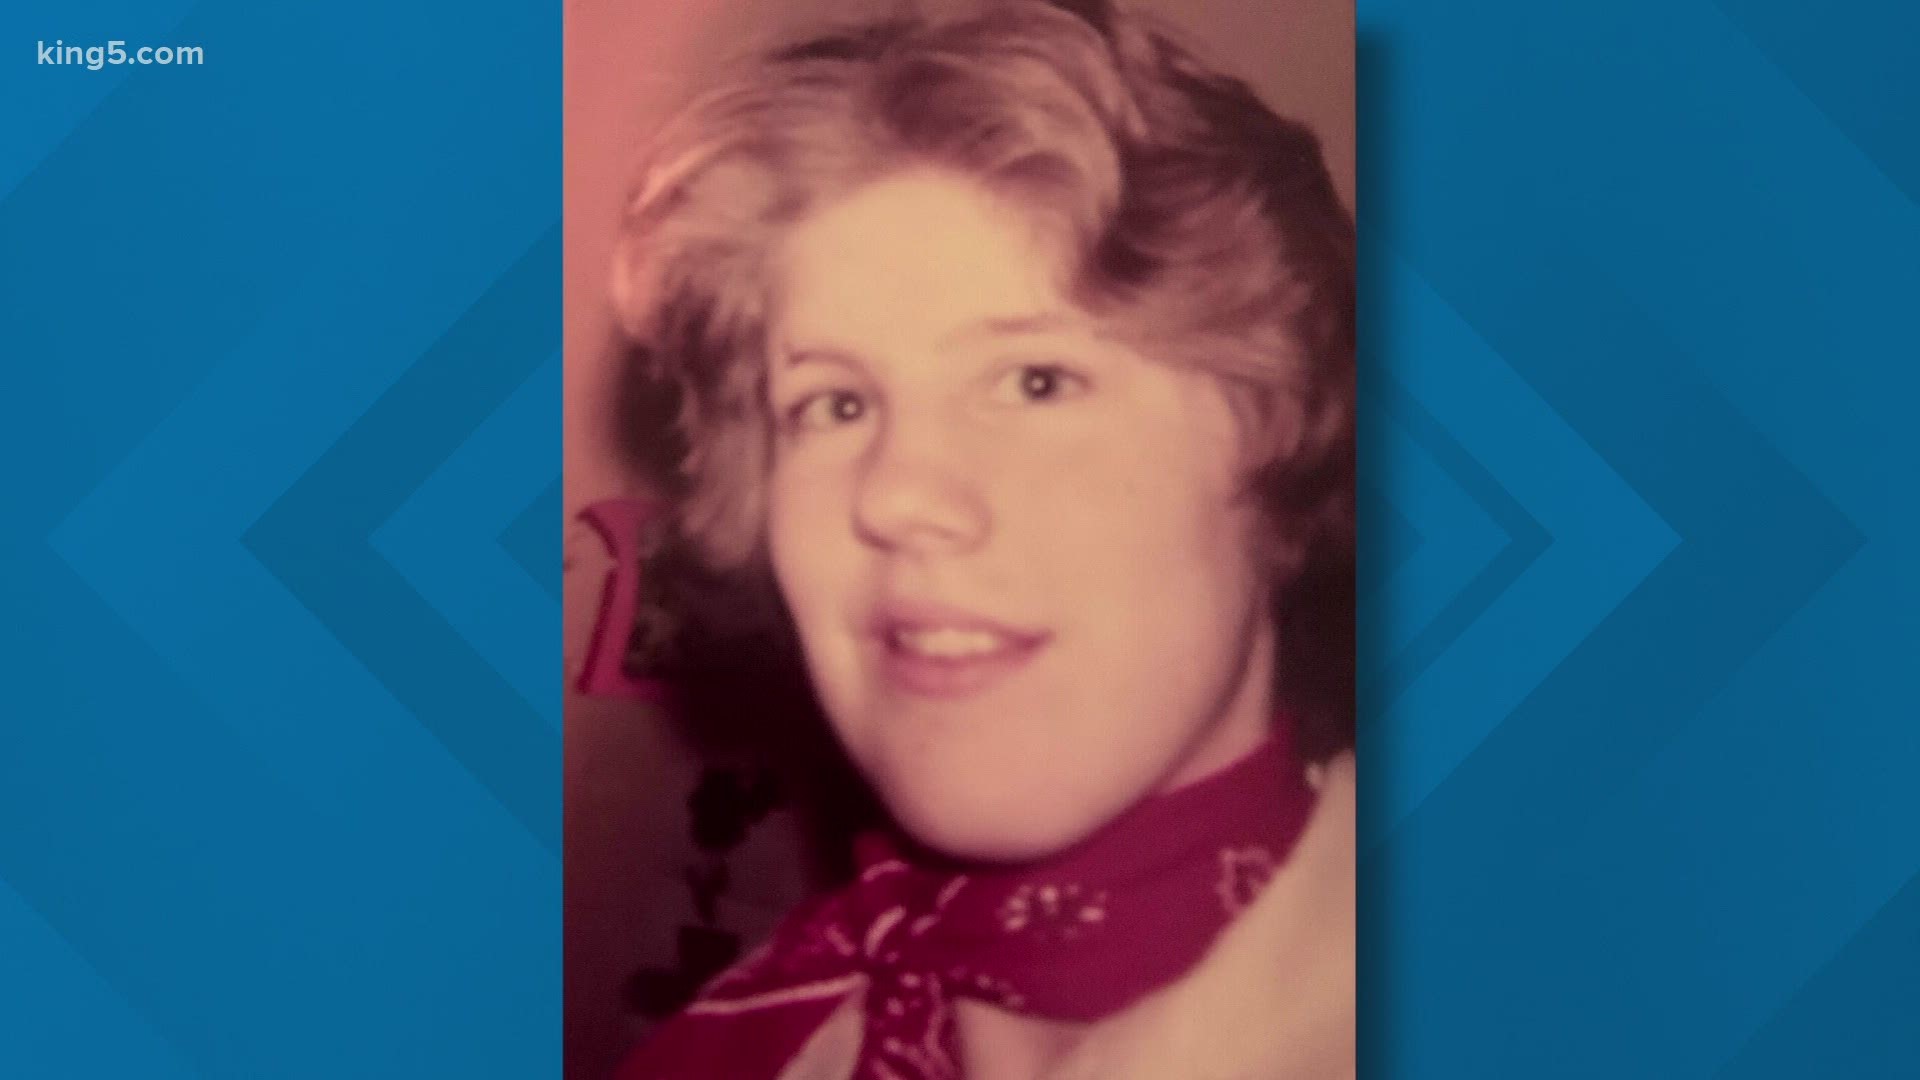 A ‘Precious Jane Doe’ 1977 Everett murder victim was identified using a new scientific technique previously thought to be impossible.